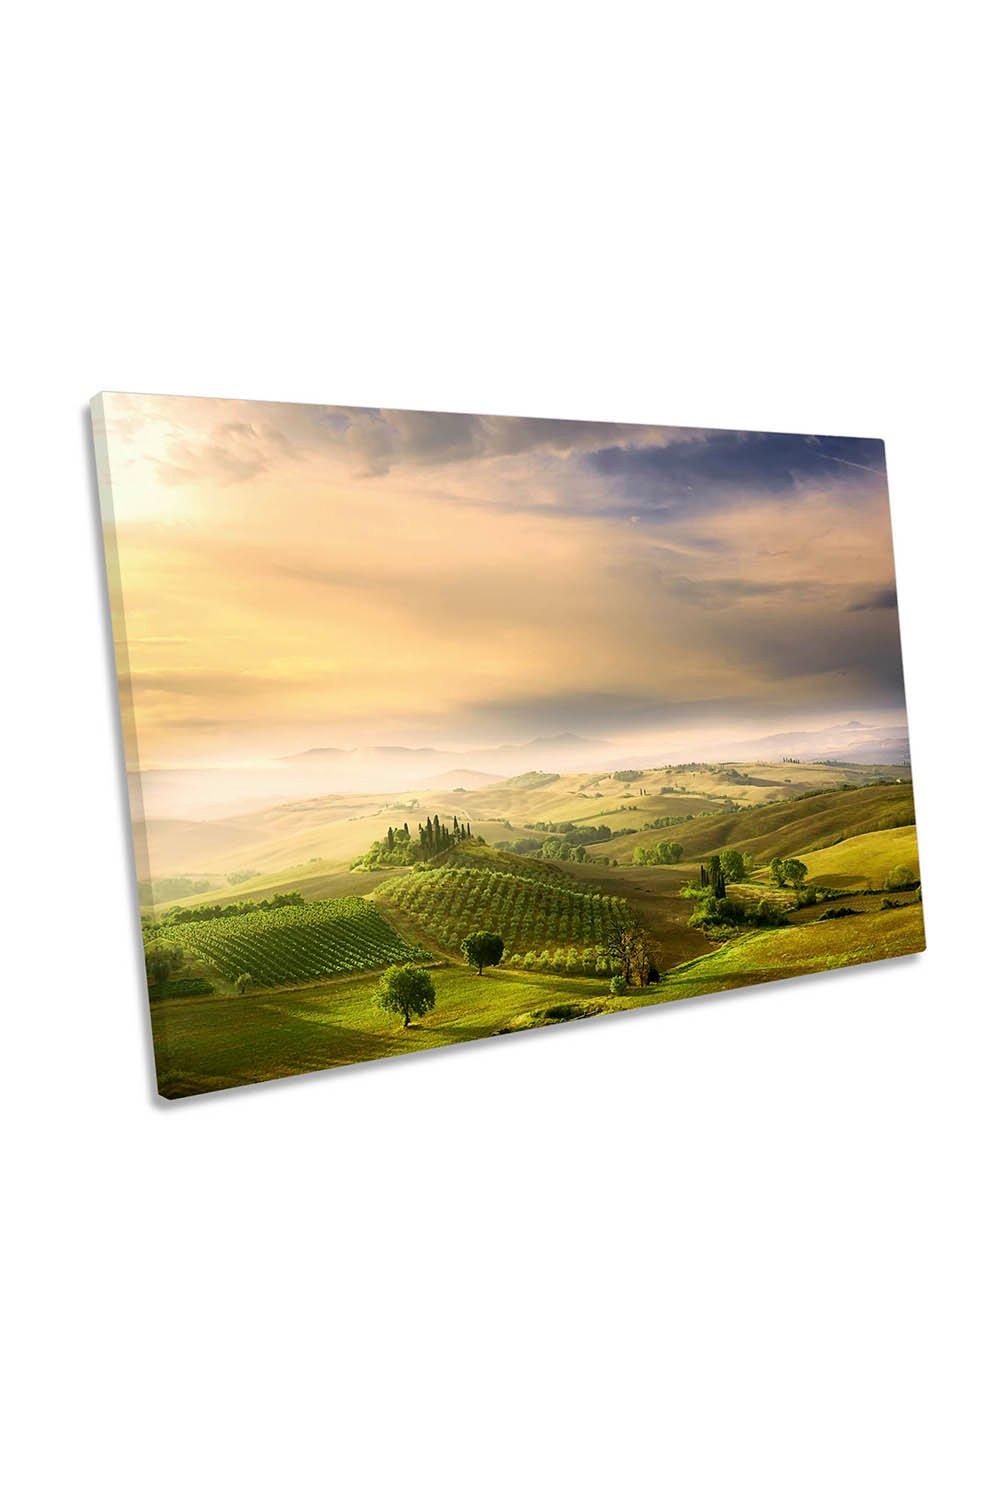 Podere Belvedere's Sunrise Tuscany Canvas Wall Art Picture Print